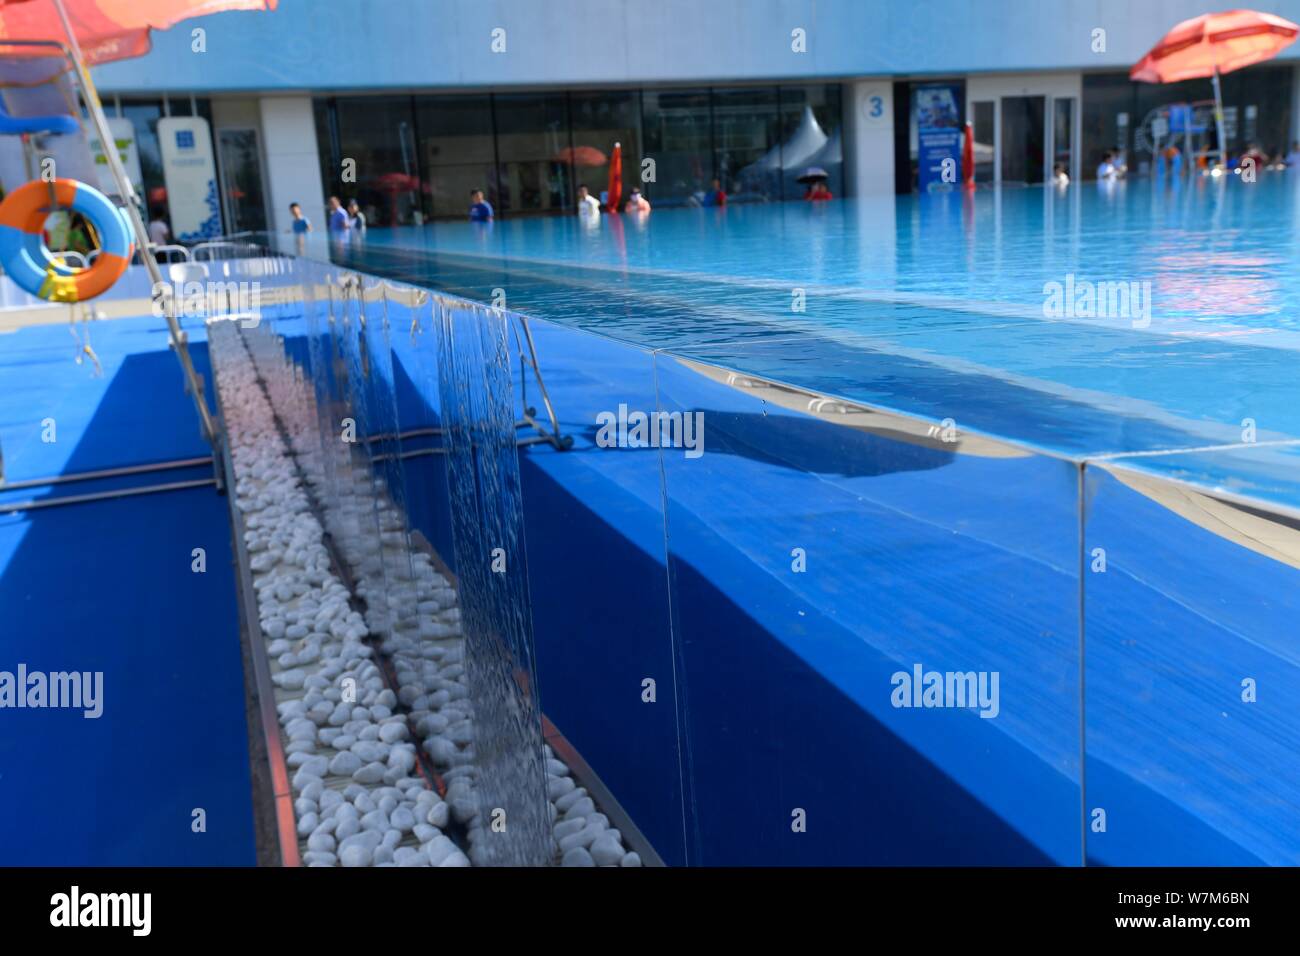 mentaal Afrekenen hebzuchtig View of the 25 meters long and 15 meters wide infinity pool beside China's  National Aquatics Center, better known as "Water Cube", in Beijing, China  Stock Photo - Alamy